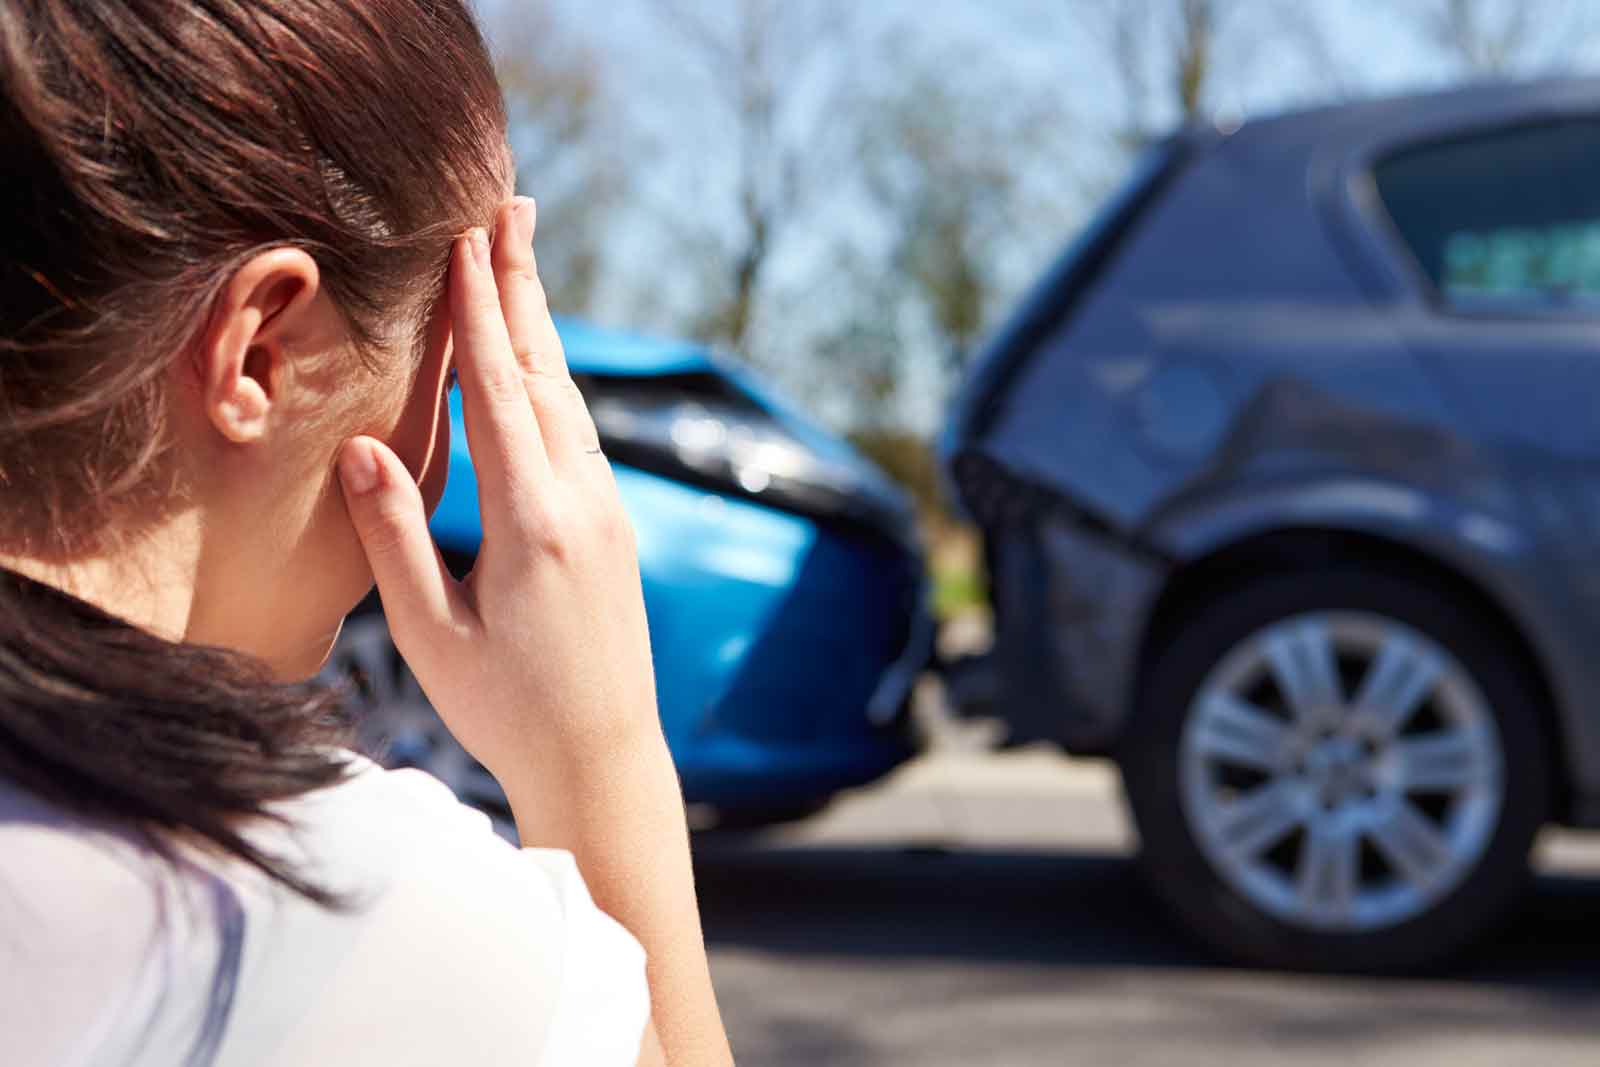 The Evidence: What You Need to Prove Liability if You are in a Car Accident